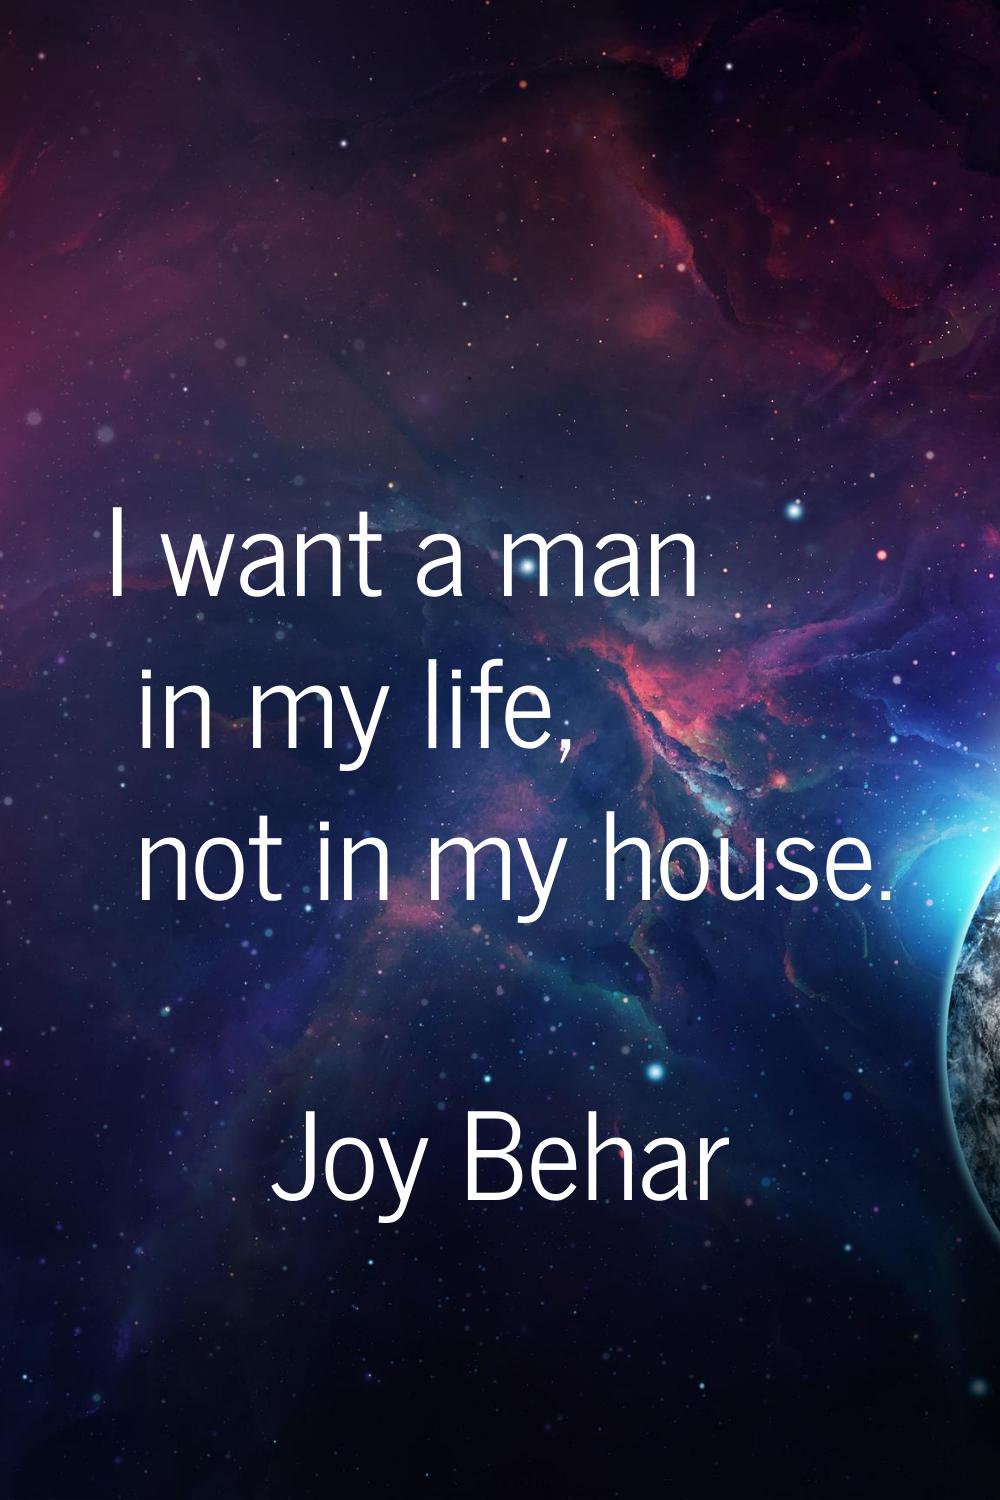 I want a man in my life, not in my house.